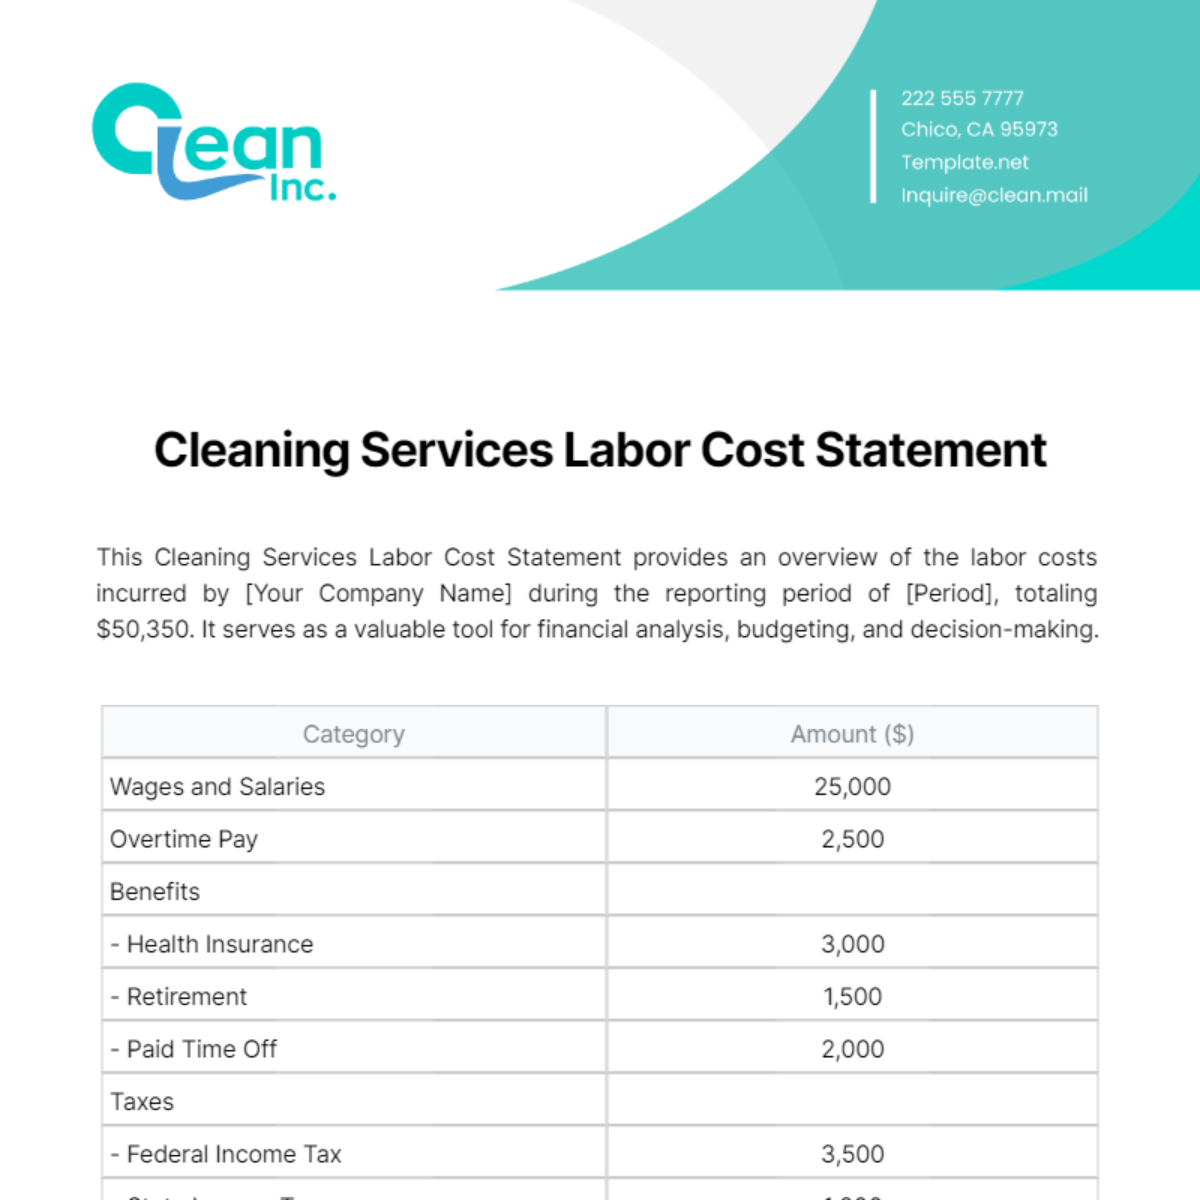 Cleaning Services Labor Cost Statement Template